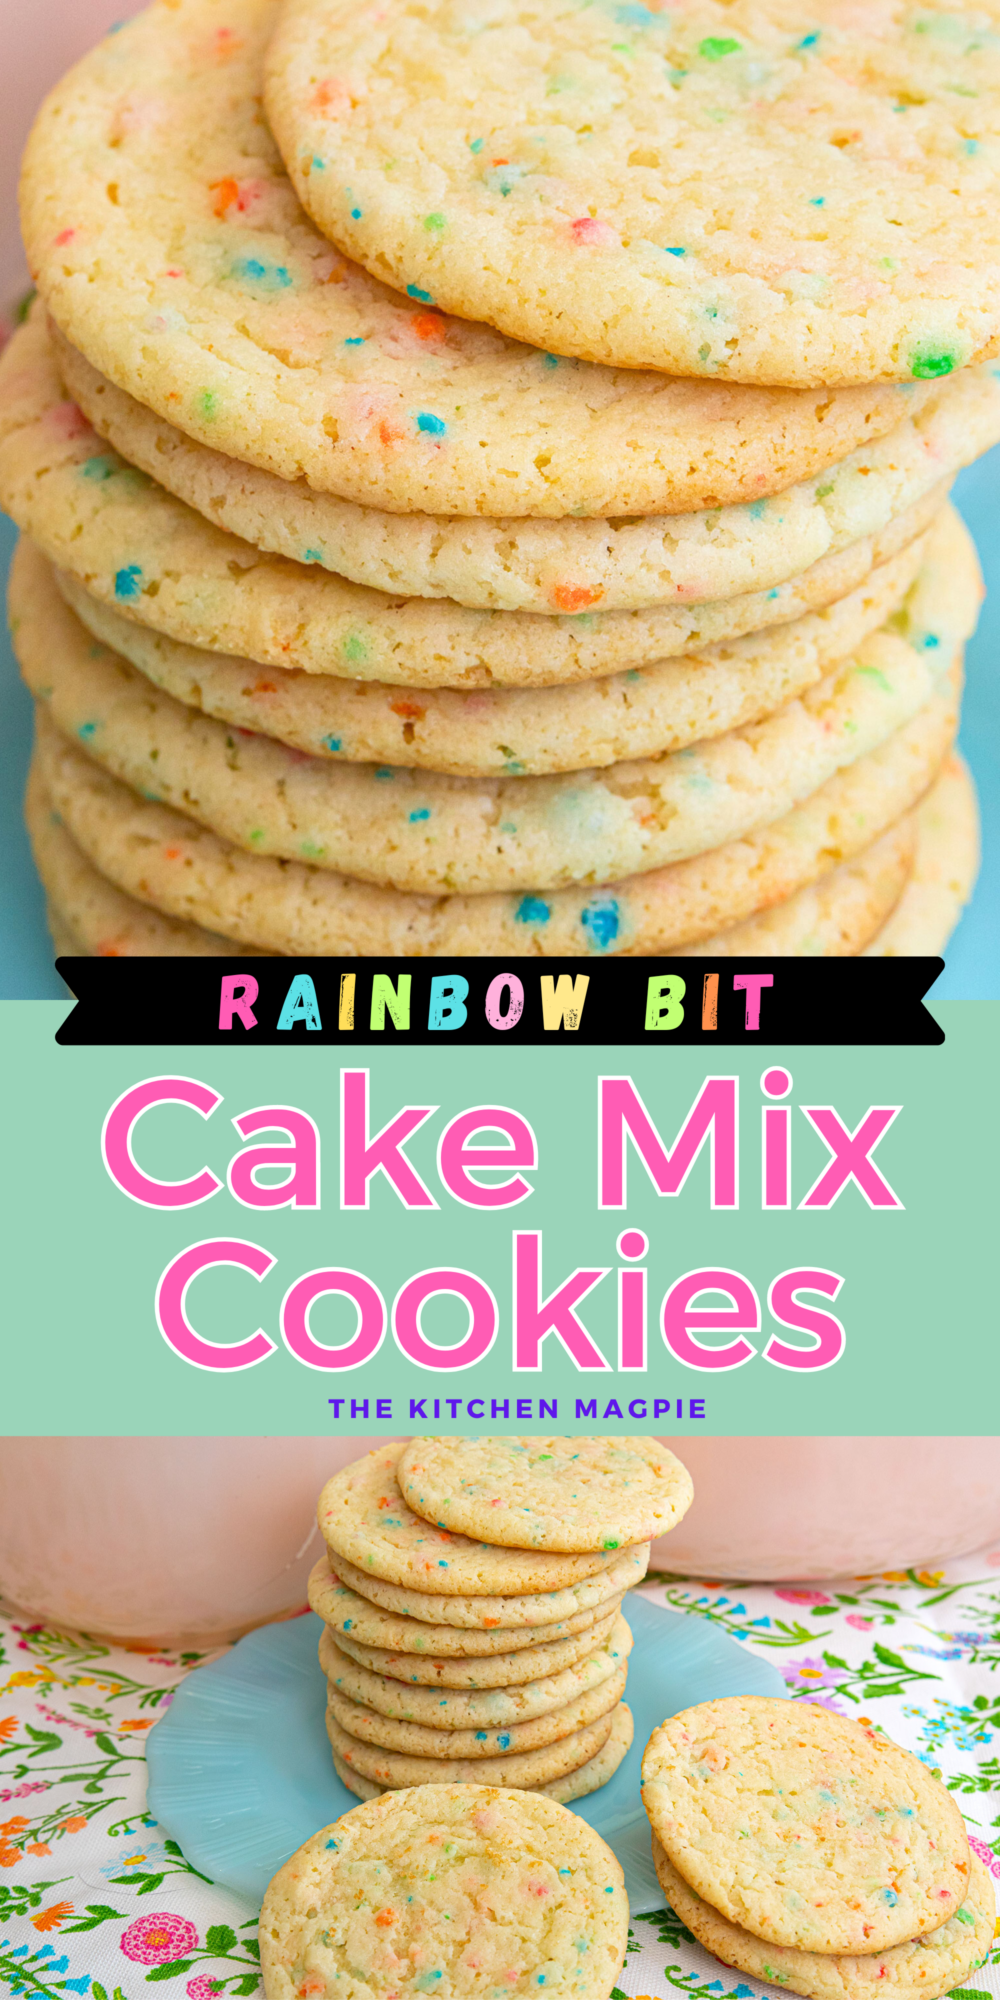 Easy and fast rainbow bit cake mix cookies for when you are in a hurry! #cookies #cakemix #funfetti 